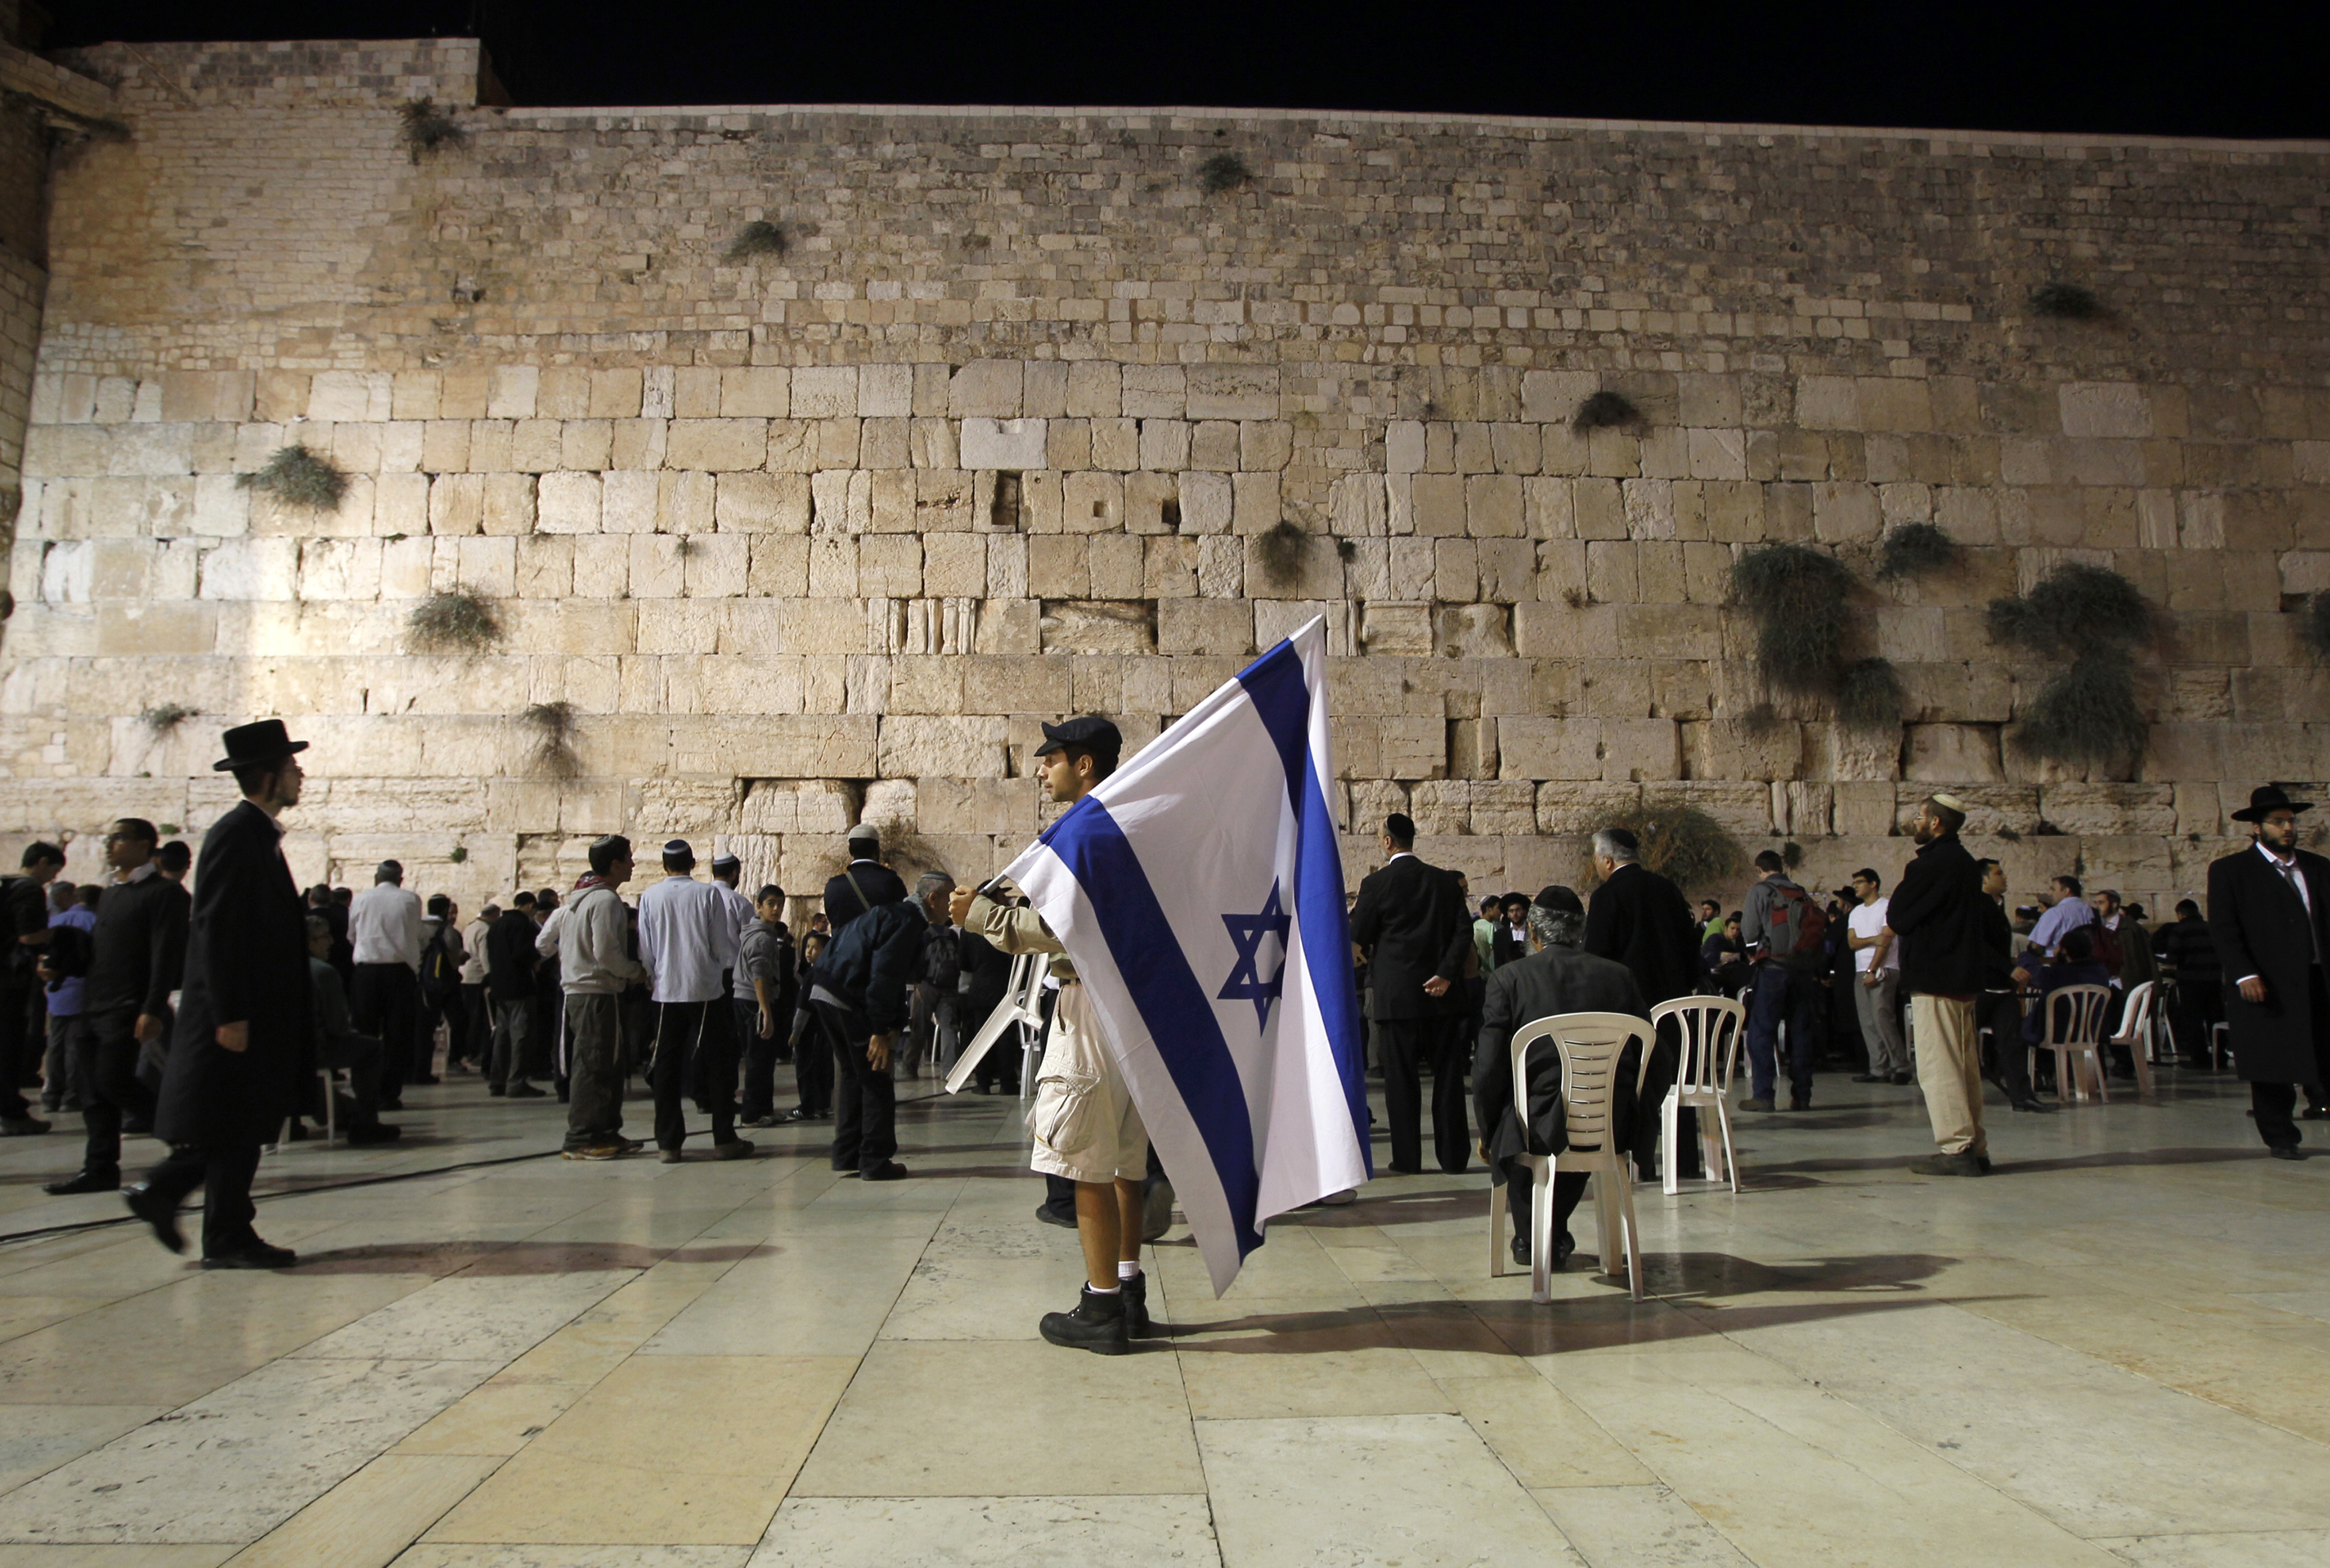 A man holds an Israeli flag during a mass prayer at the Western Wall in Jerusalem.